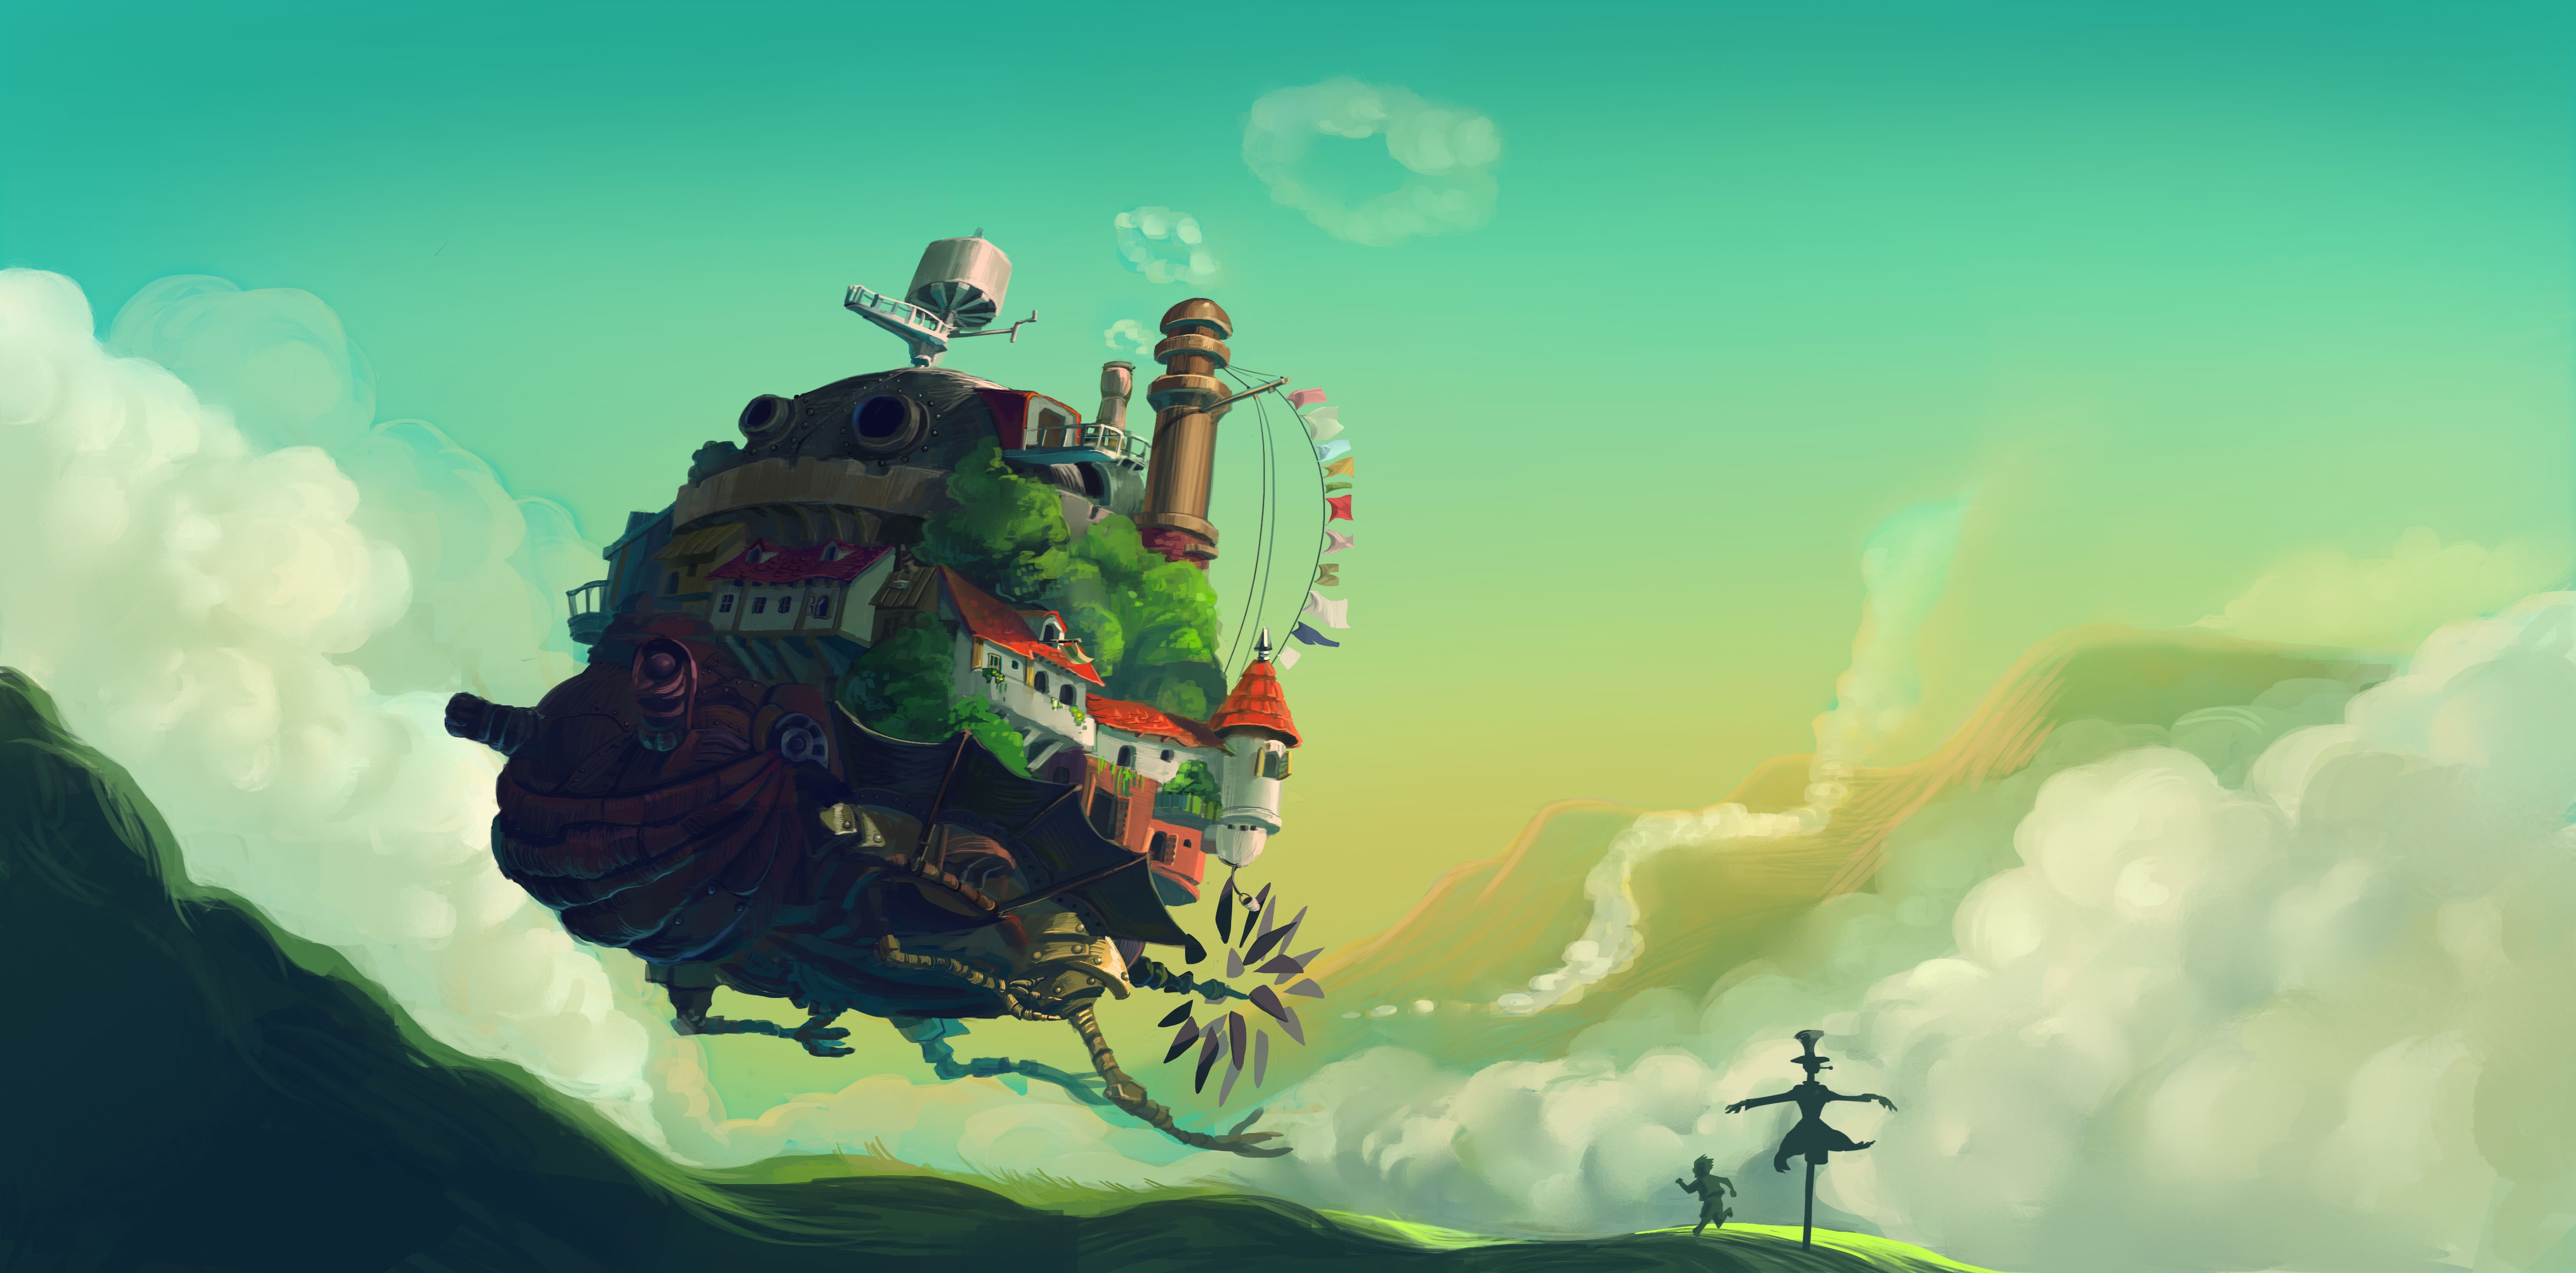 howland039s, Moving, Castle, Anime, Cartoon, Fantasy, Ships, Vehicles, Landscapes, Flight, Buildings, Houses, Cities, Art Wallpaper